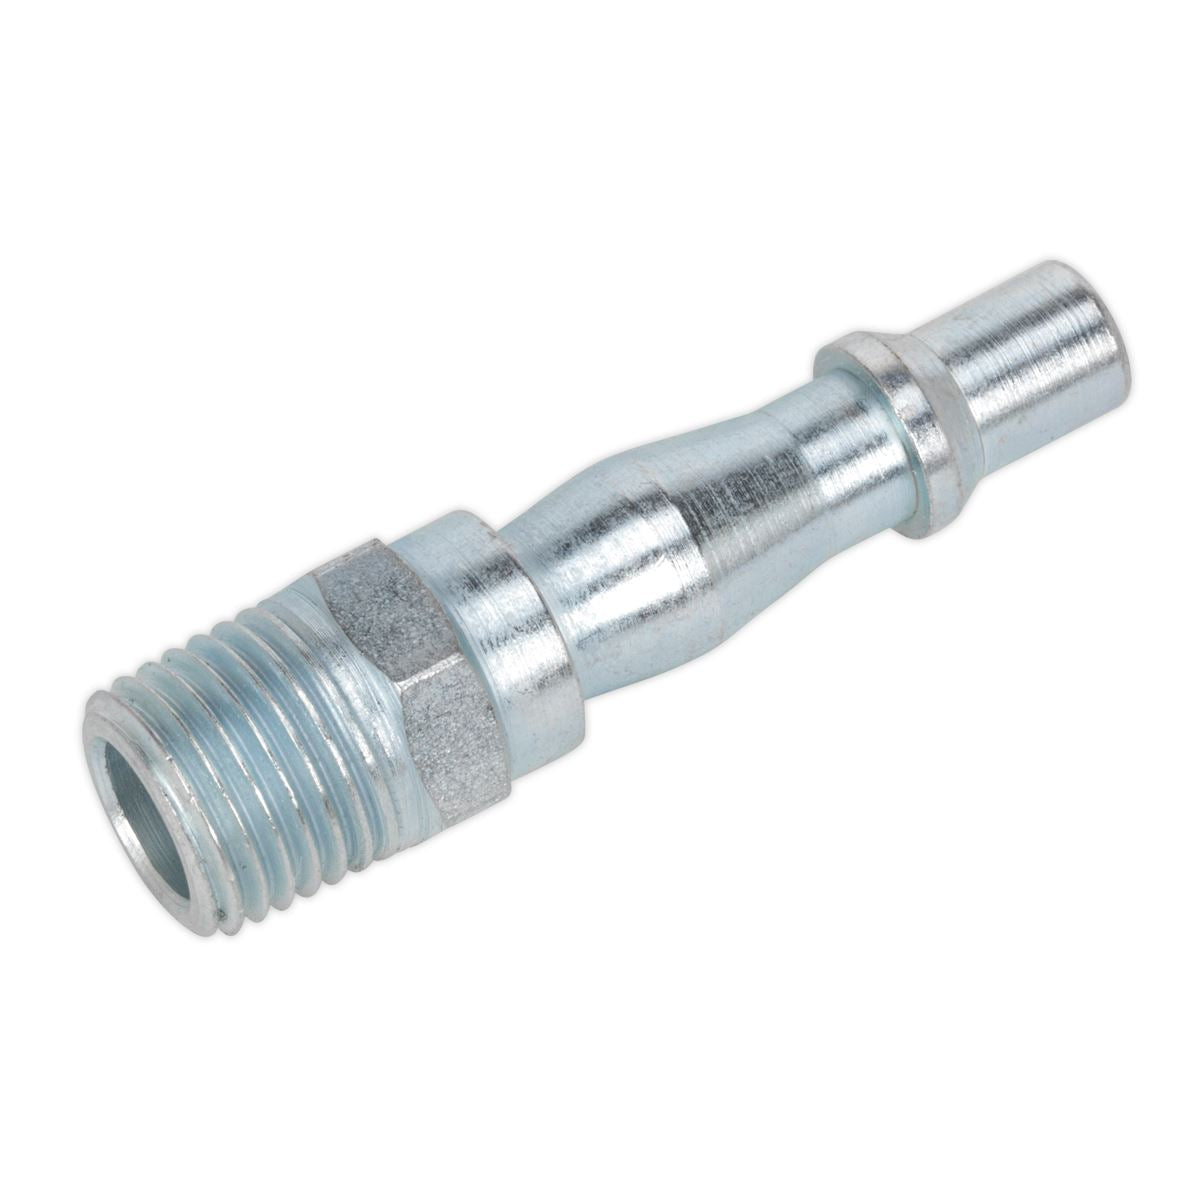 PCL Screwed Adaptor Male 1/4"BSPT Pack of 15